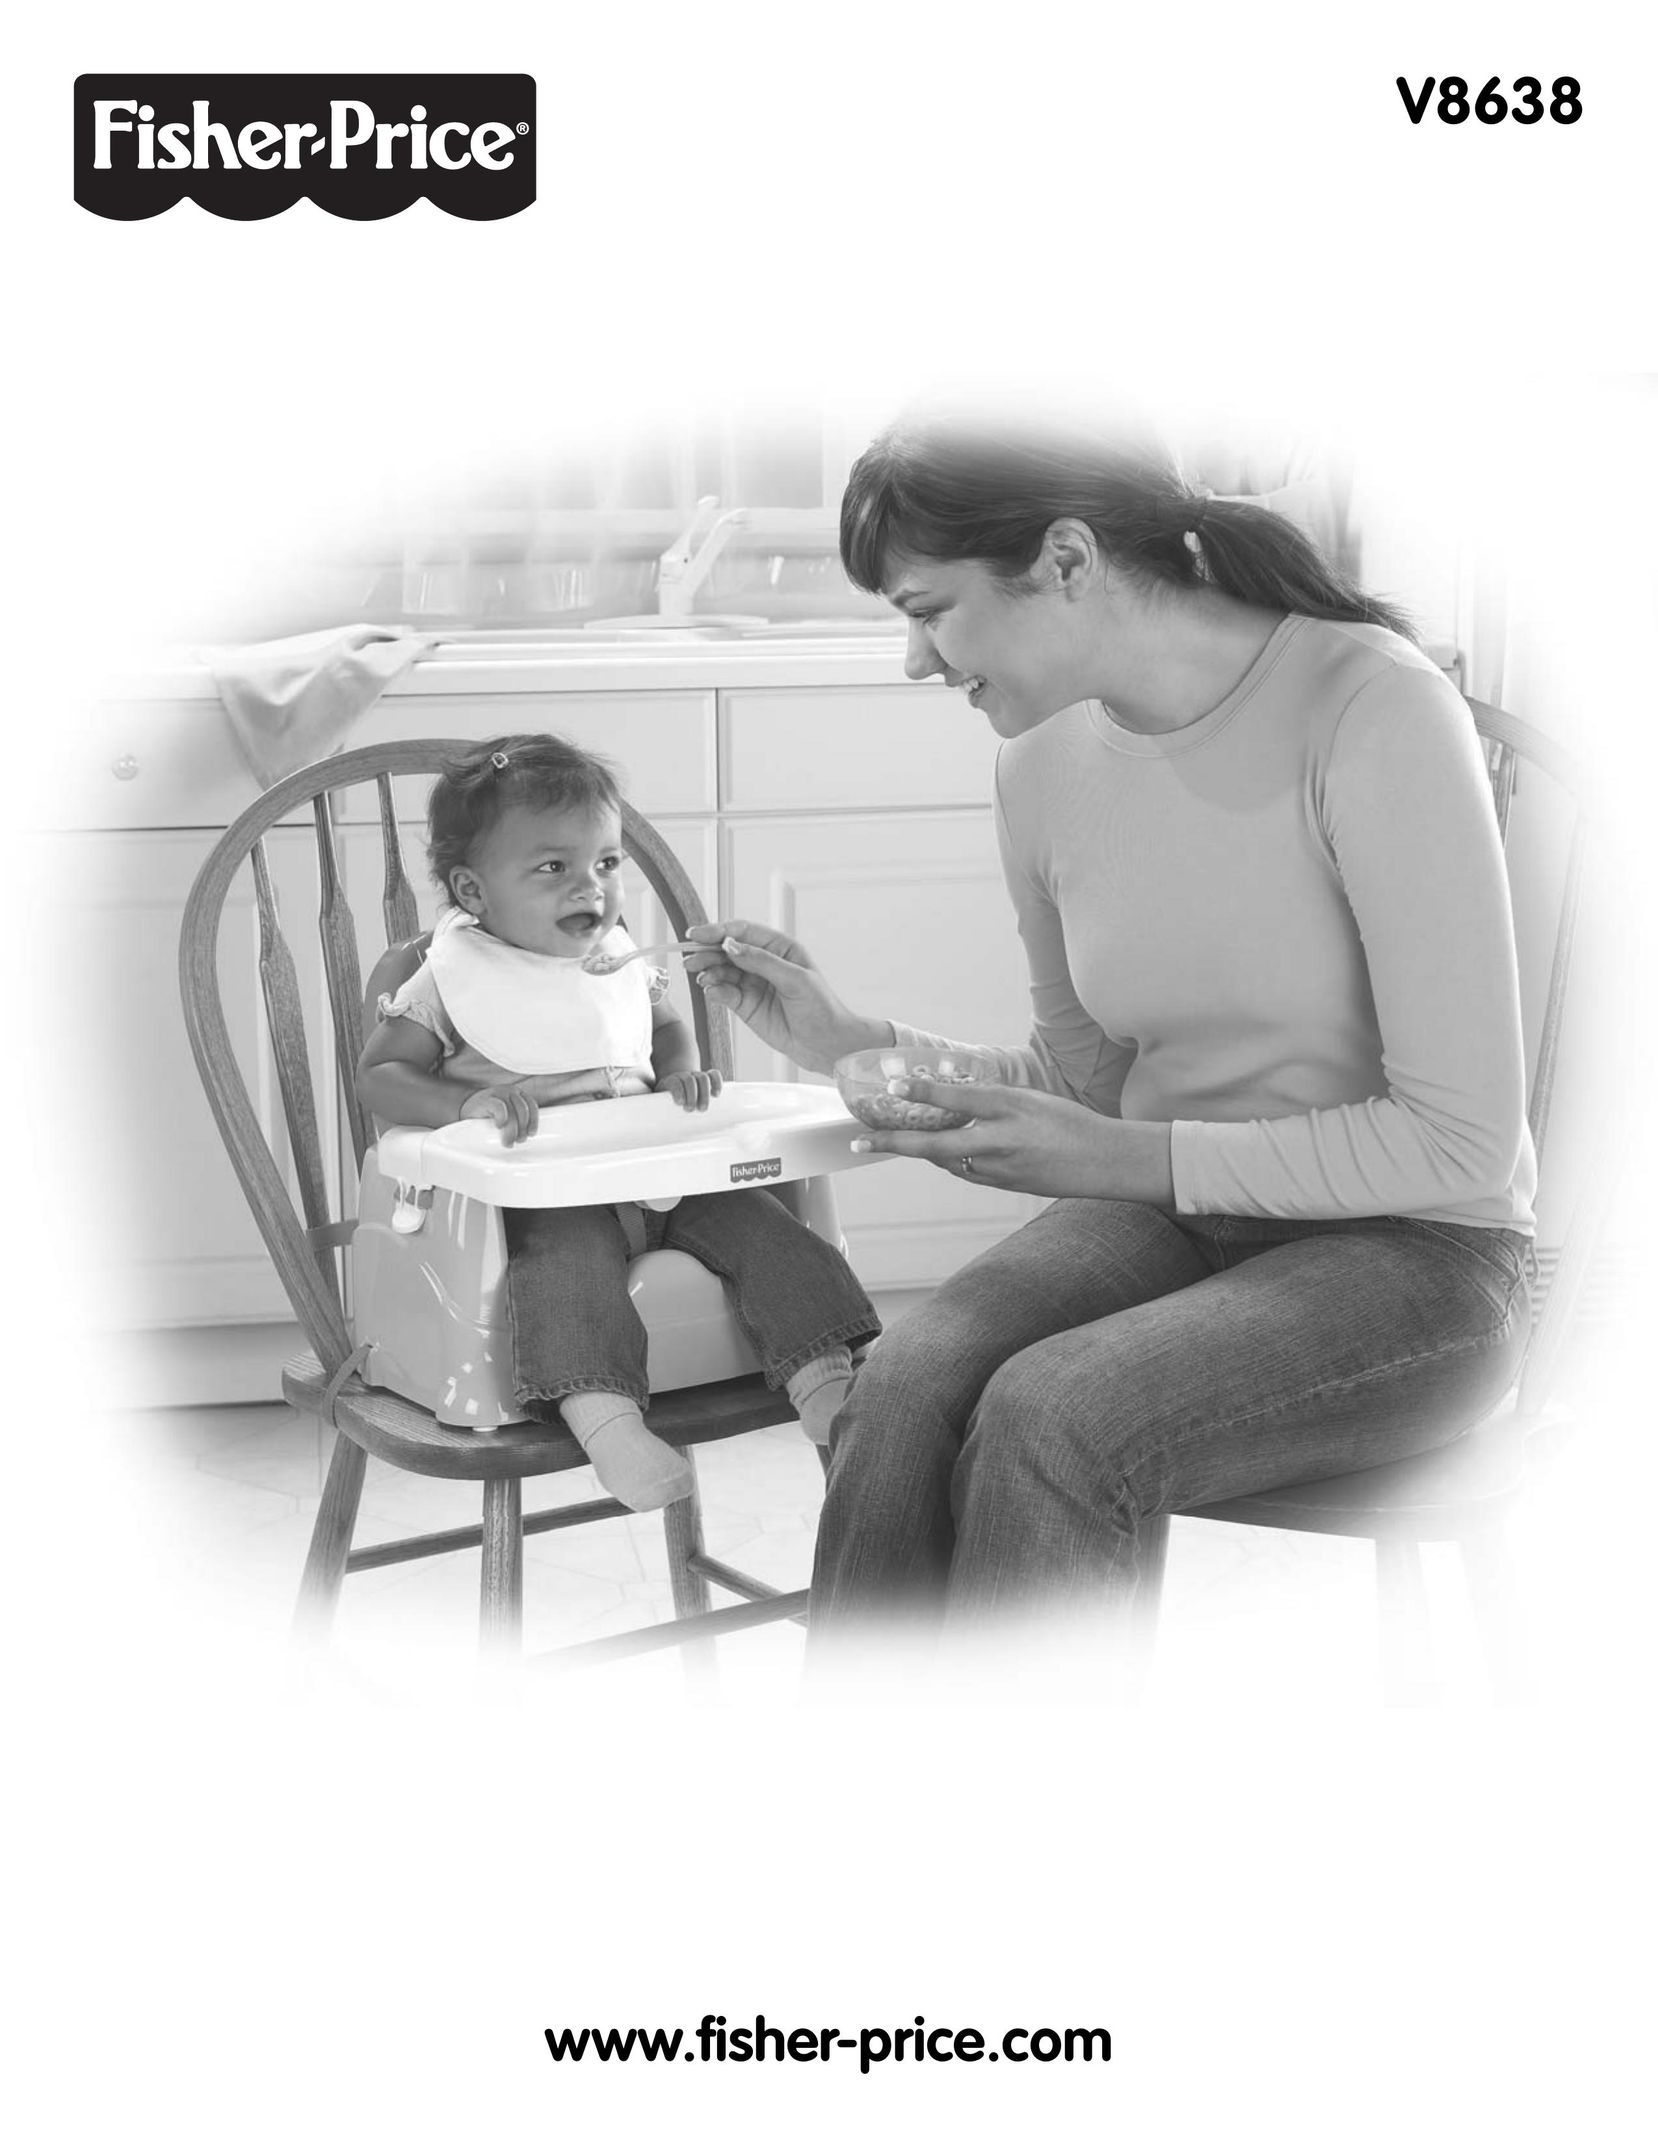 Fisher-Price V8638 High Chair User Manual